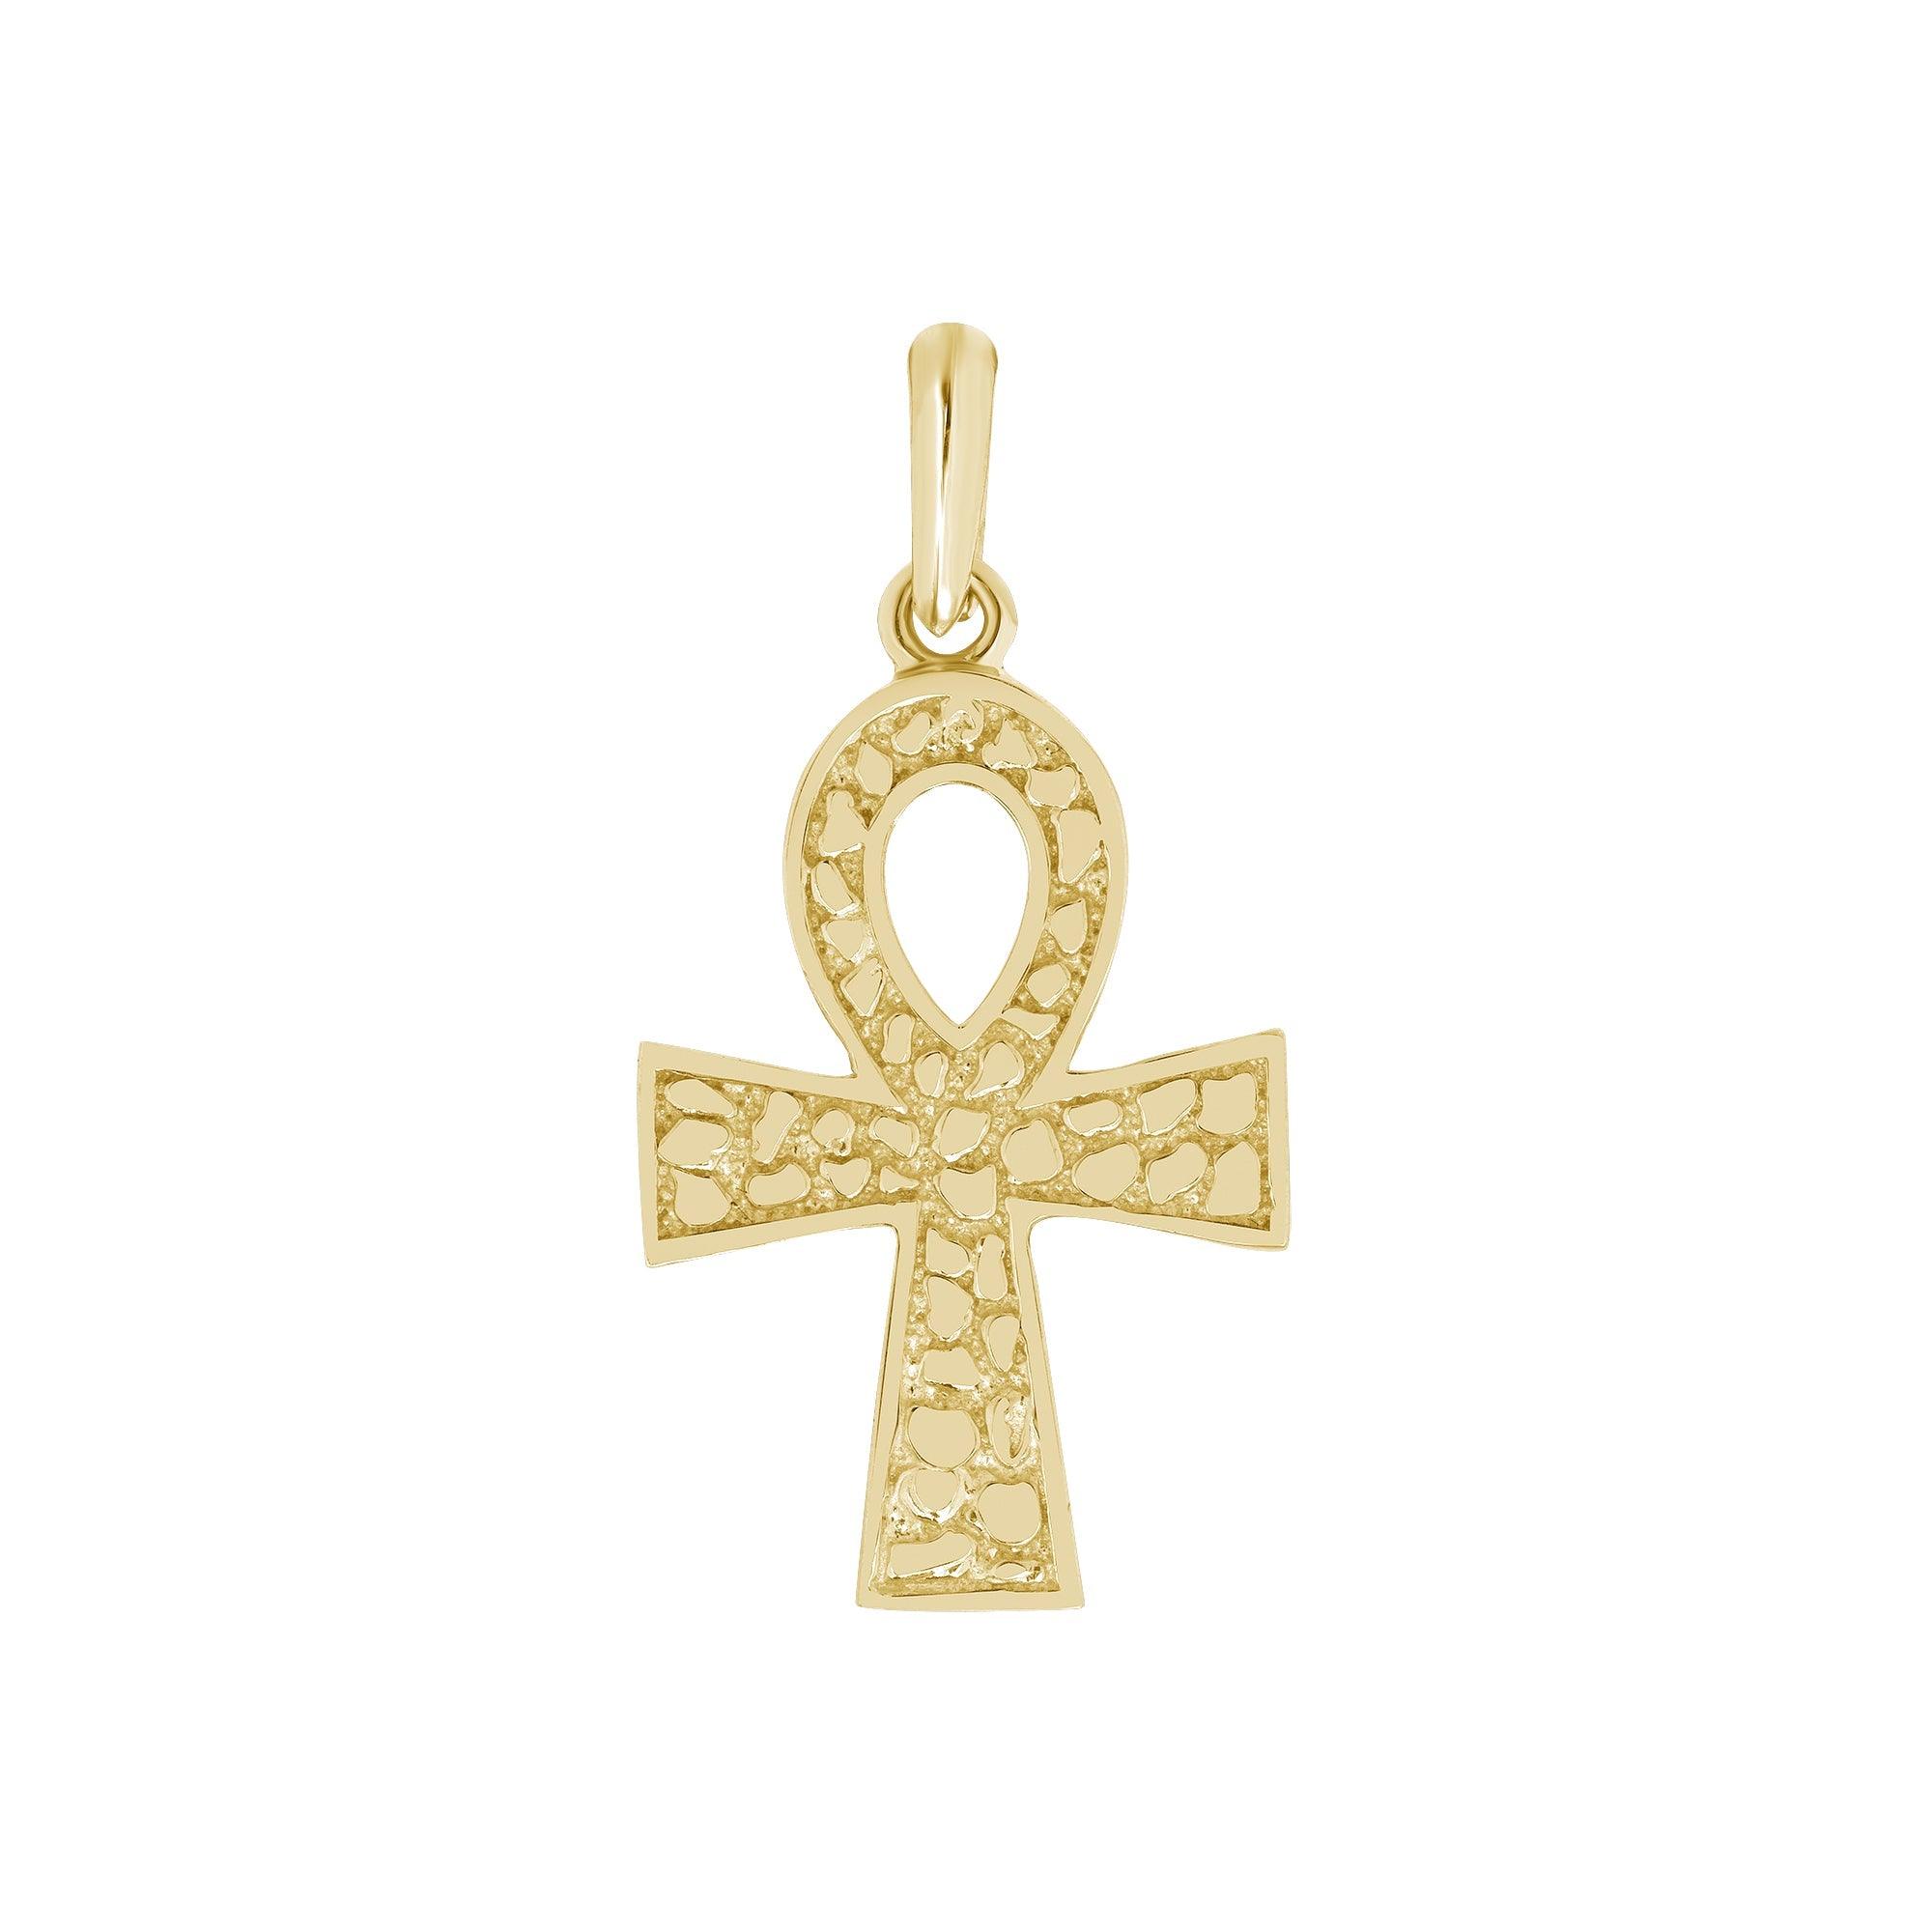 Solid Gold Ankh Cross Medium Pendant with Delicate Details from Rafi's Jewelry